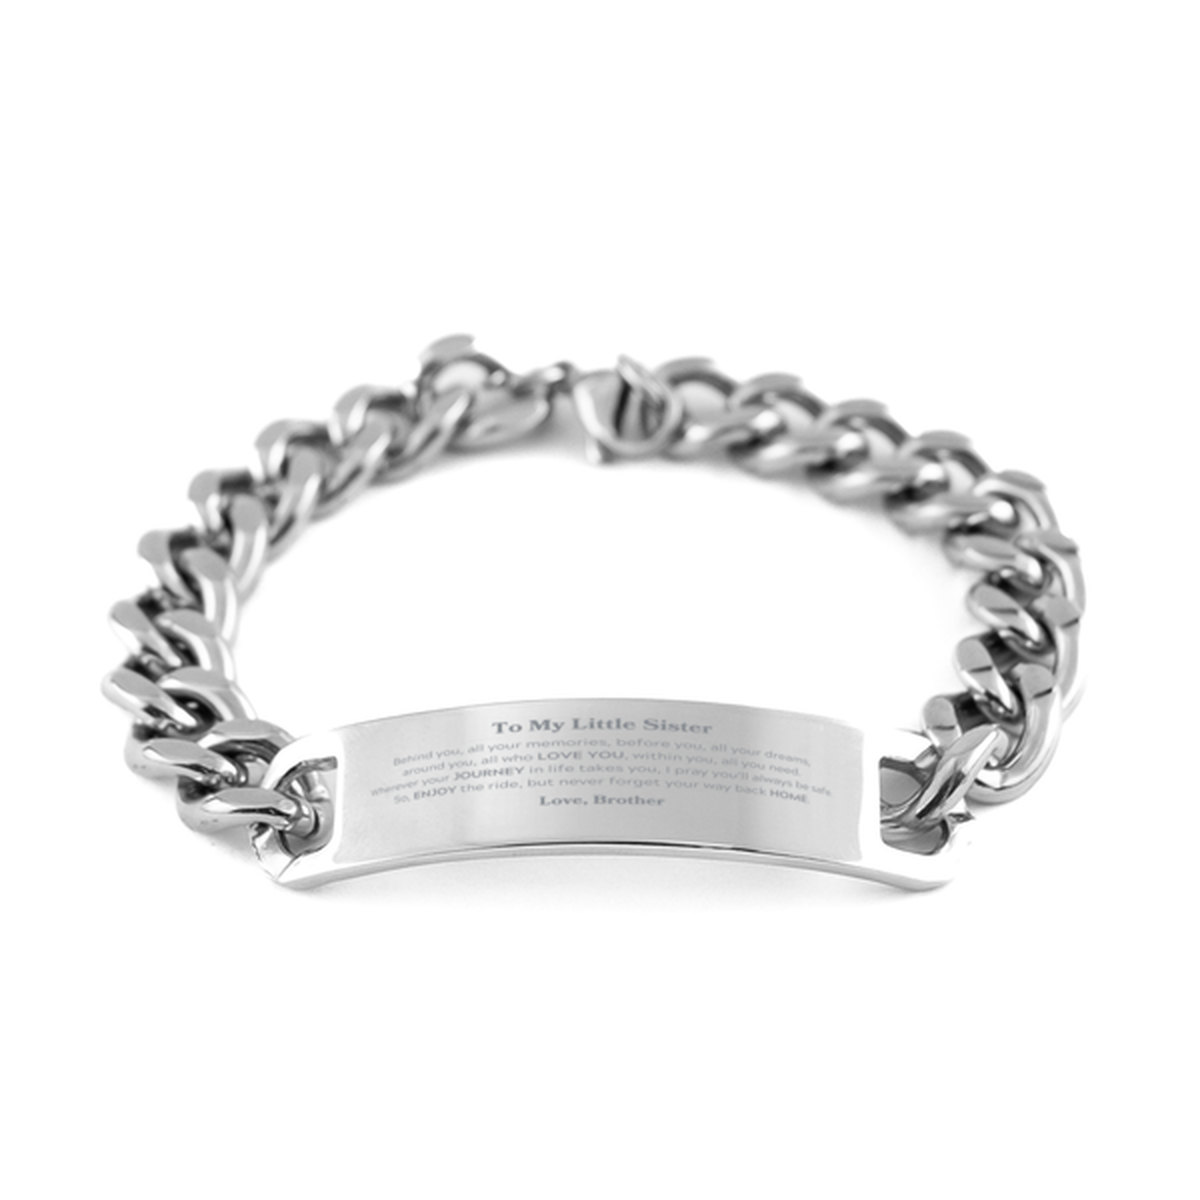 To My Little Sister Graduation Gifts from Brother, Little Sister Cuban Chain Stainless Steel Bracelet Christmas Birthday Gifts for Little Sister Behind you, all your memories, before you, all your dreams. Love, Brother